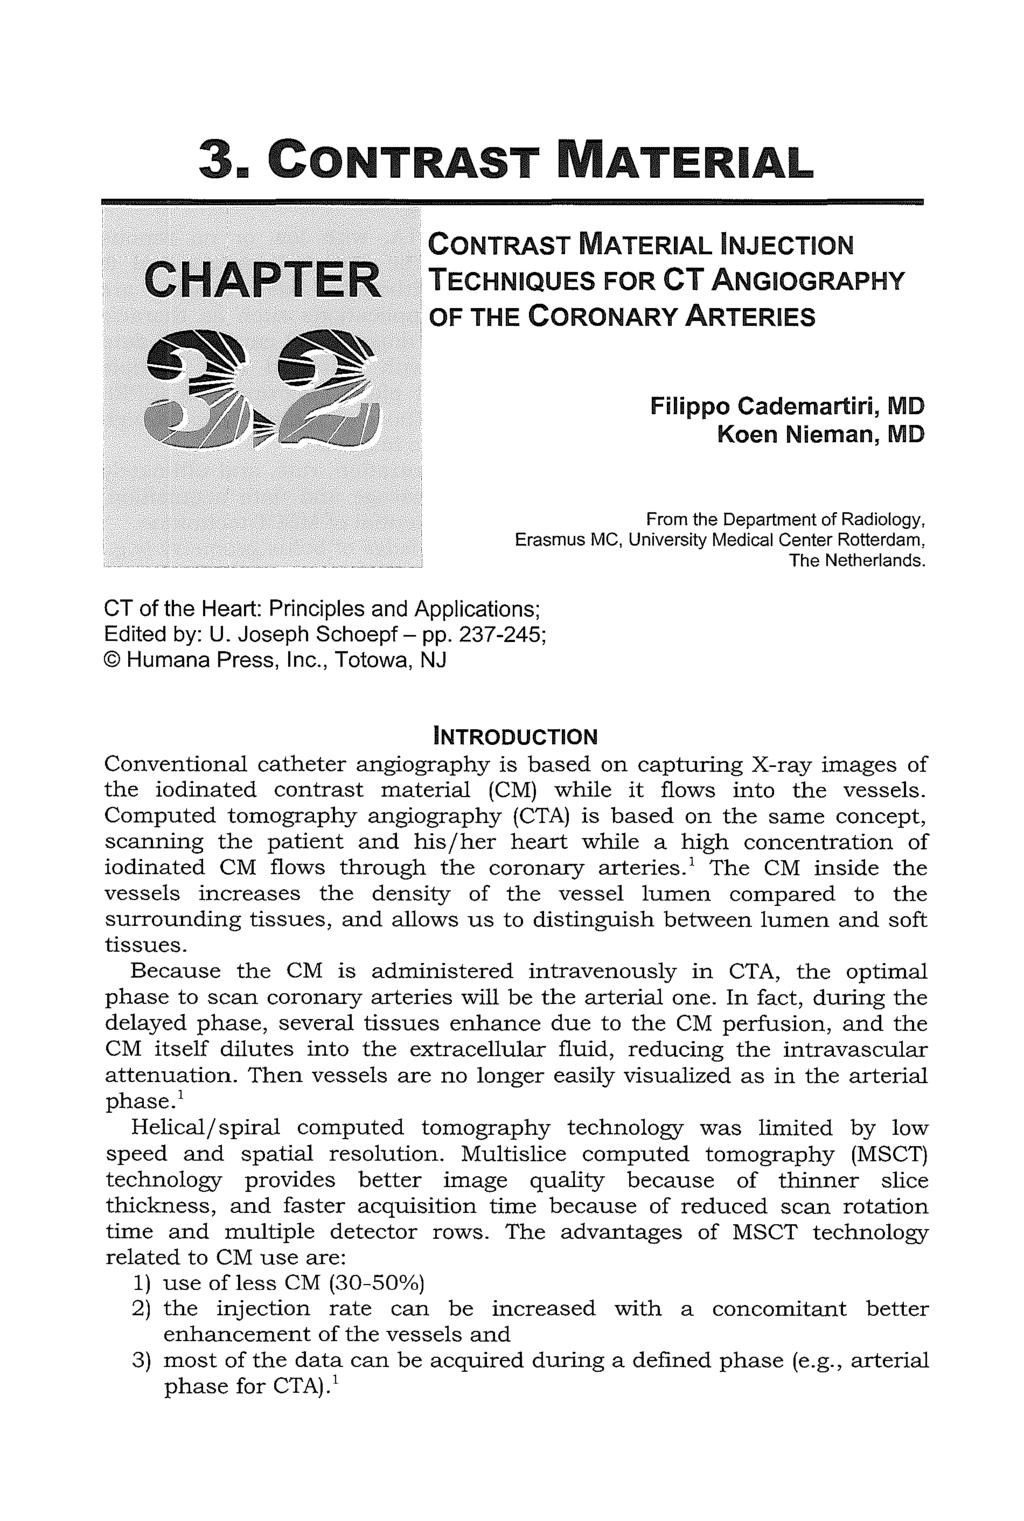 3.. CONTRAST ATE RIAL CHAPTER CONTRAST MATERIAL INJECTION TECHNIQUES FOR CT ANGIOGRAPHY OF THE CORONARY ARTERIES Filippo Cademartiri, MD Koen Nieman, MD CT of the Heart: Principles and Applications;